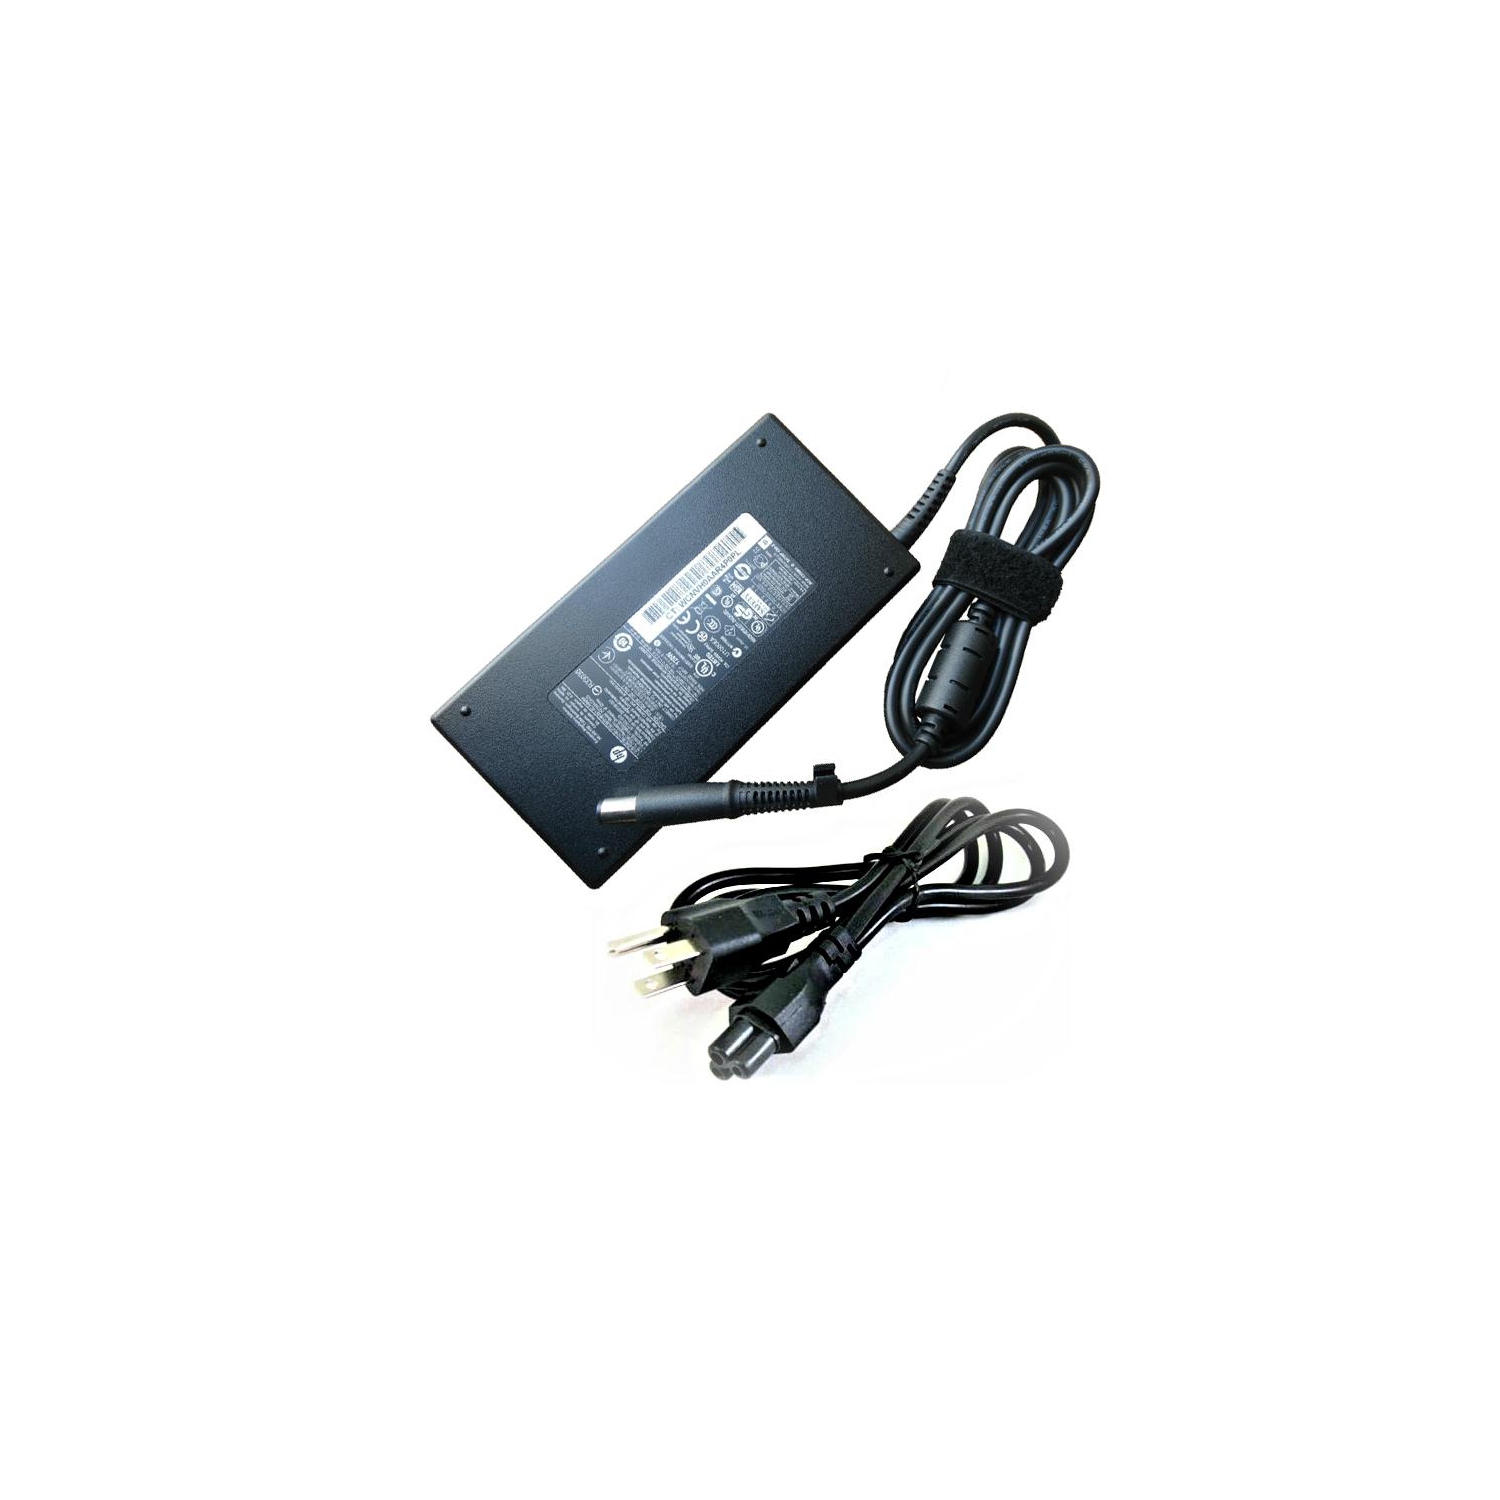 New Genuine HP Pavilion 20 AIO All In One Series Slim AC Power Adapter Charger 120W